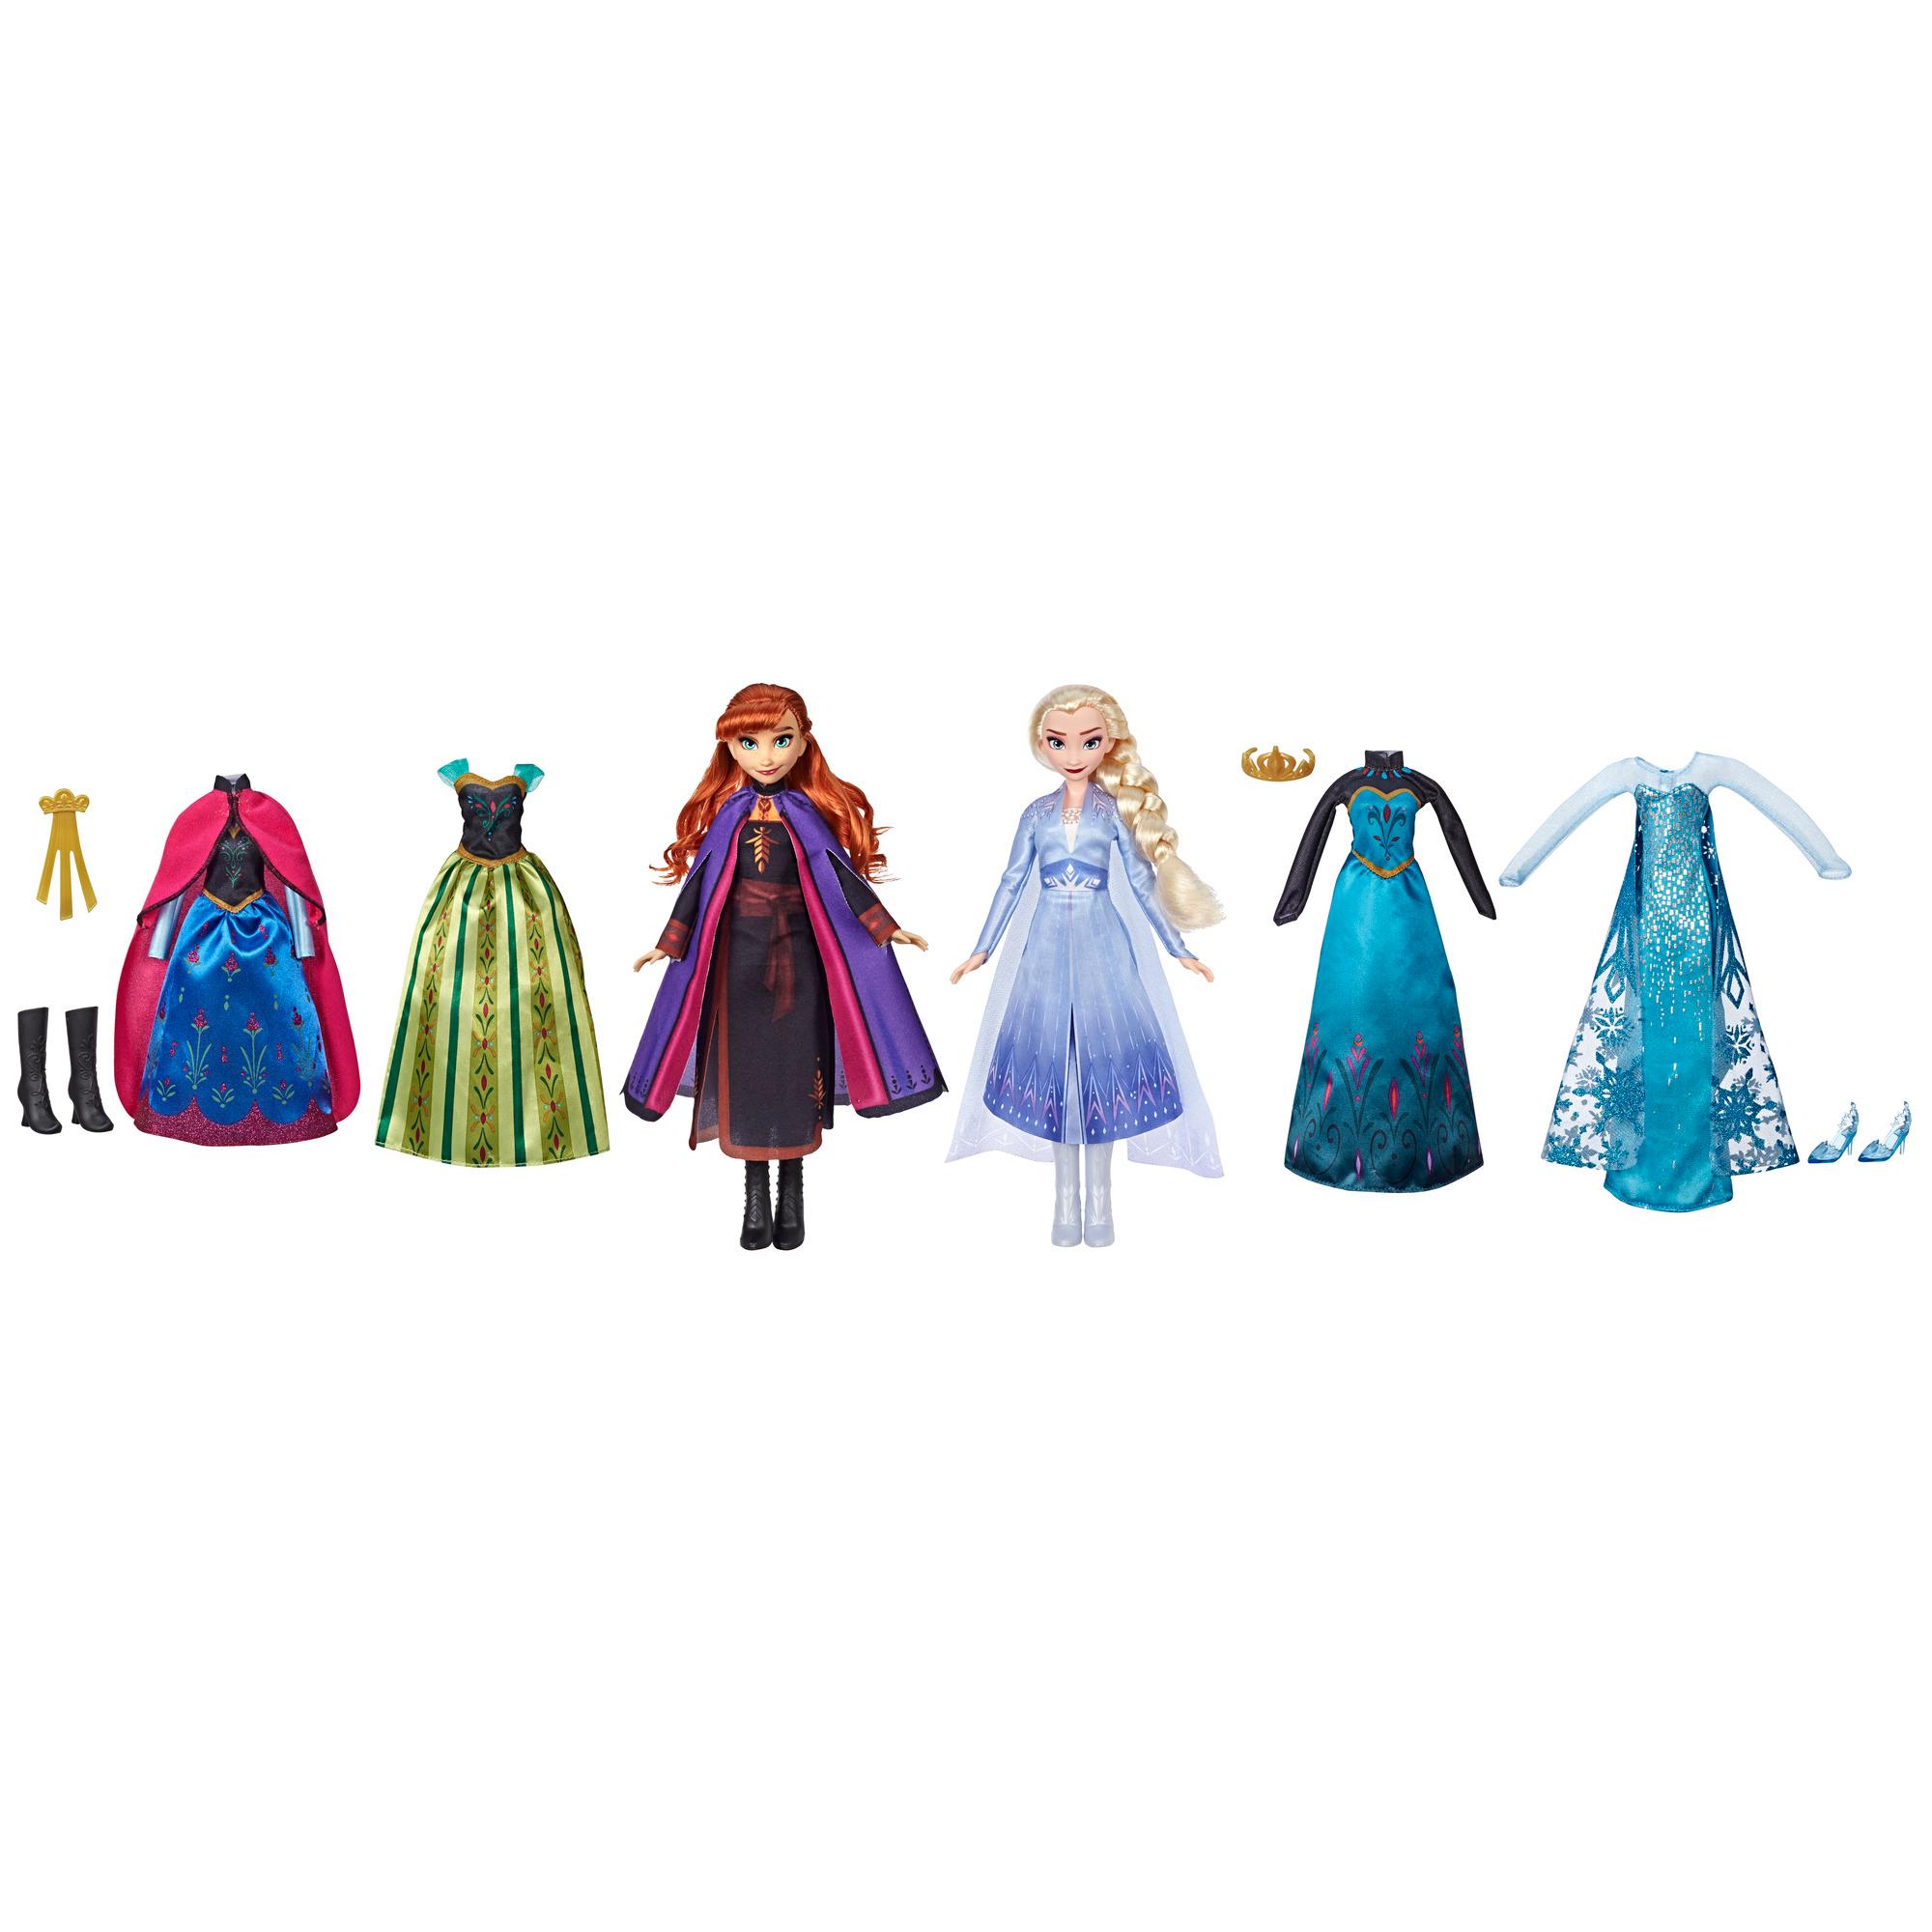 Frozen|Disney Frozen Fashion Set, Anna and Elsa Fashion Dolls with Outfits, Toy for Girls 3 and Up